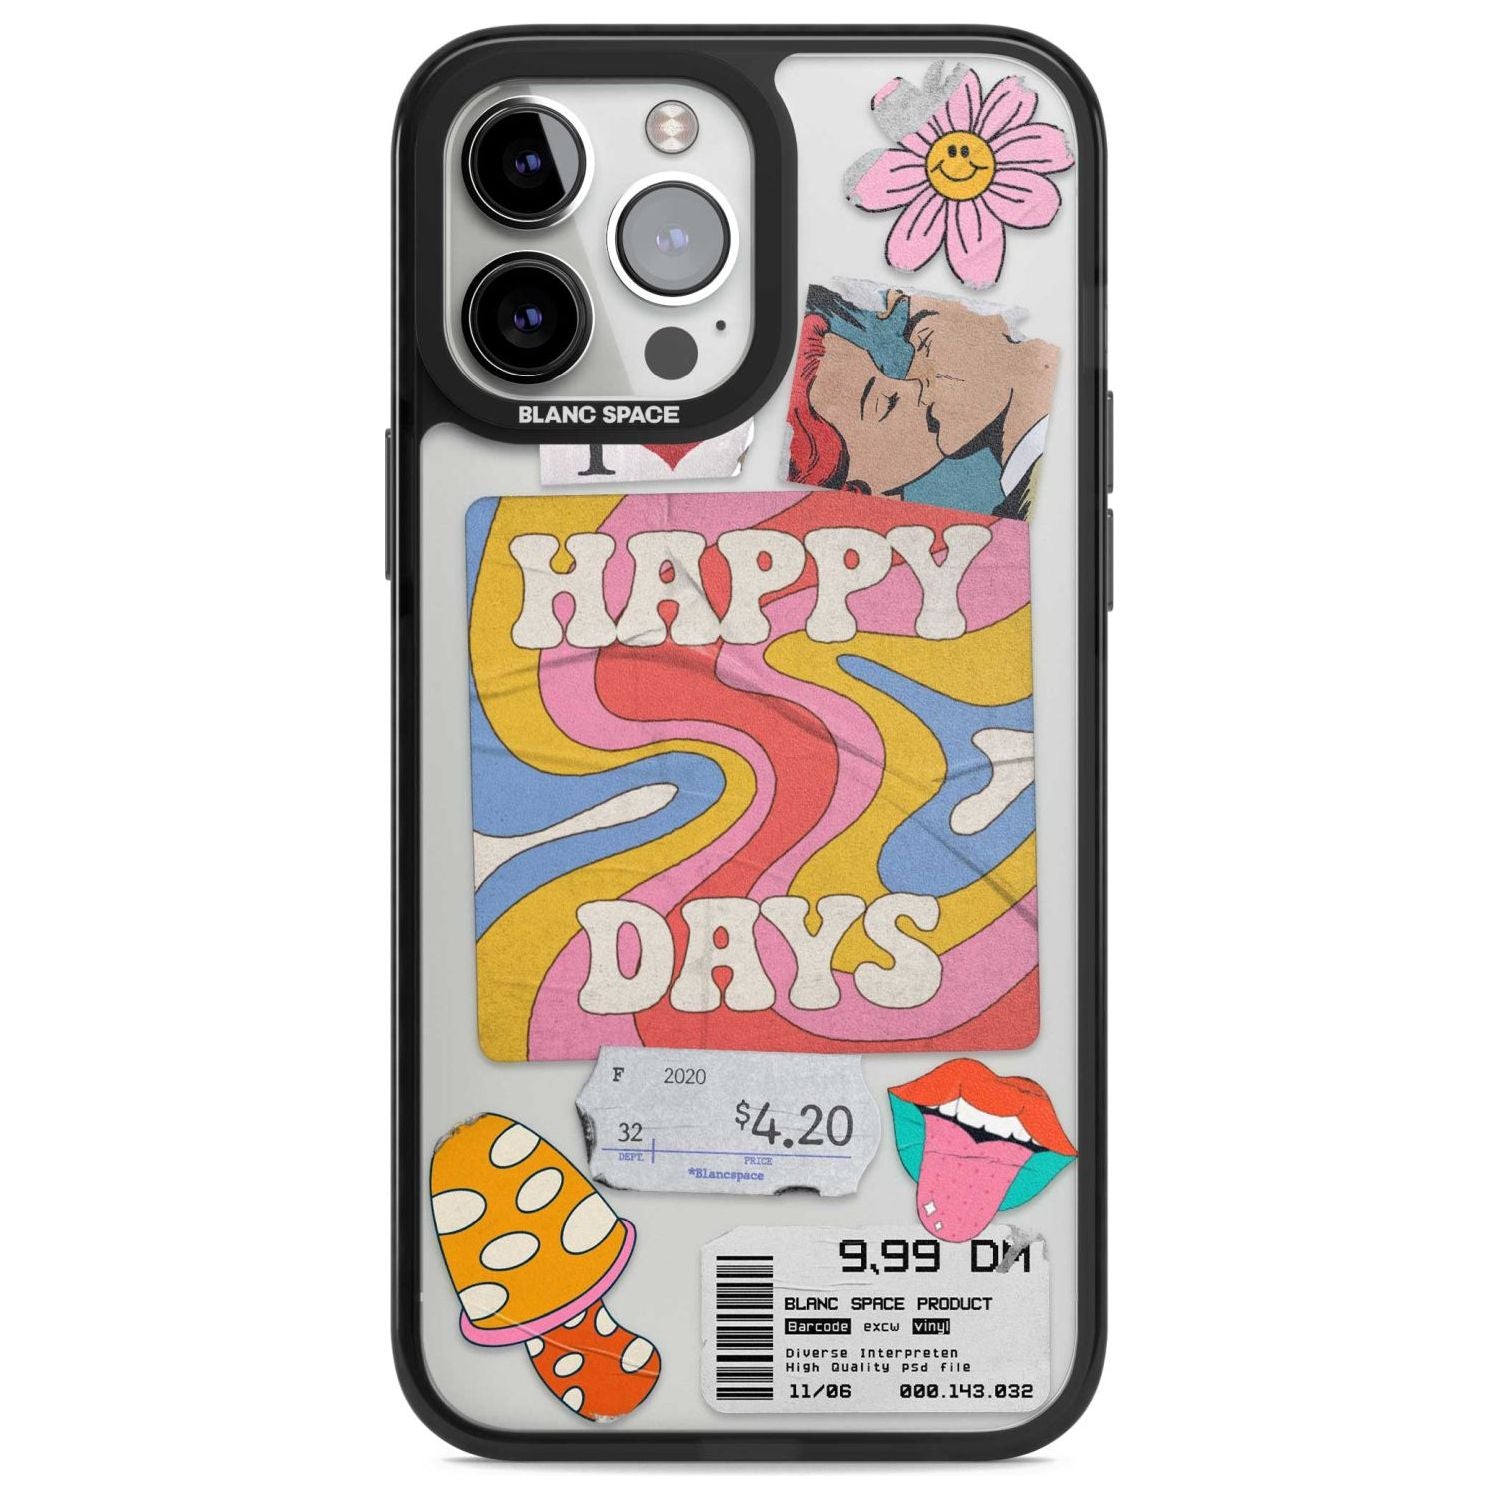 Groovy Trip Phone Case iPhone 13 Pro Max / Magsafe Black Impact Case Blanc Space